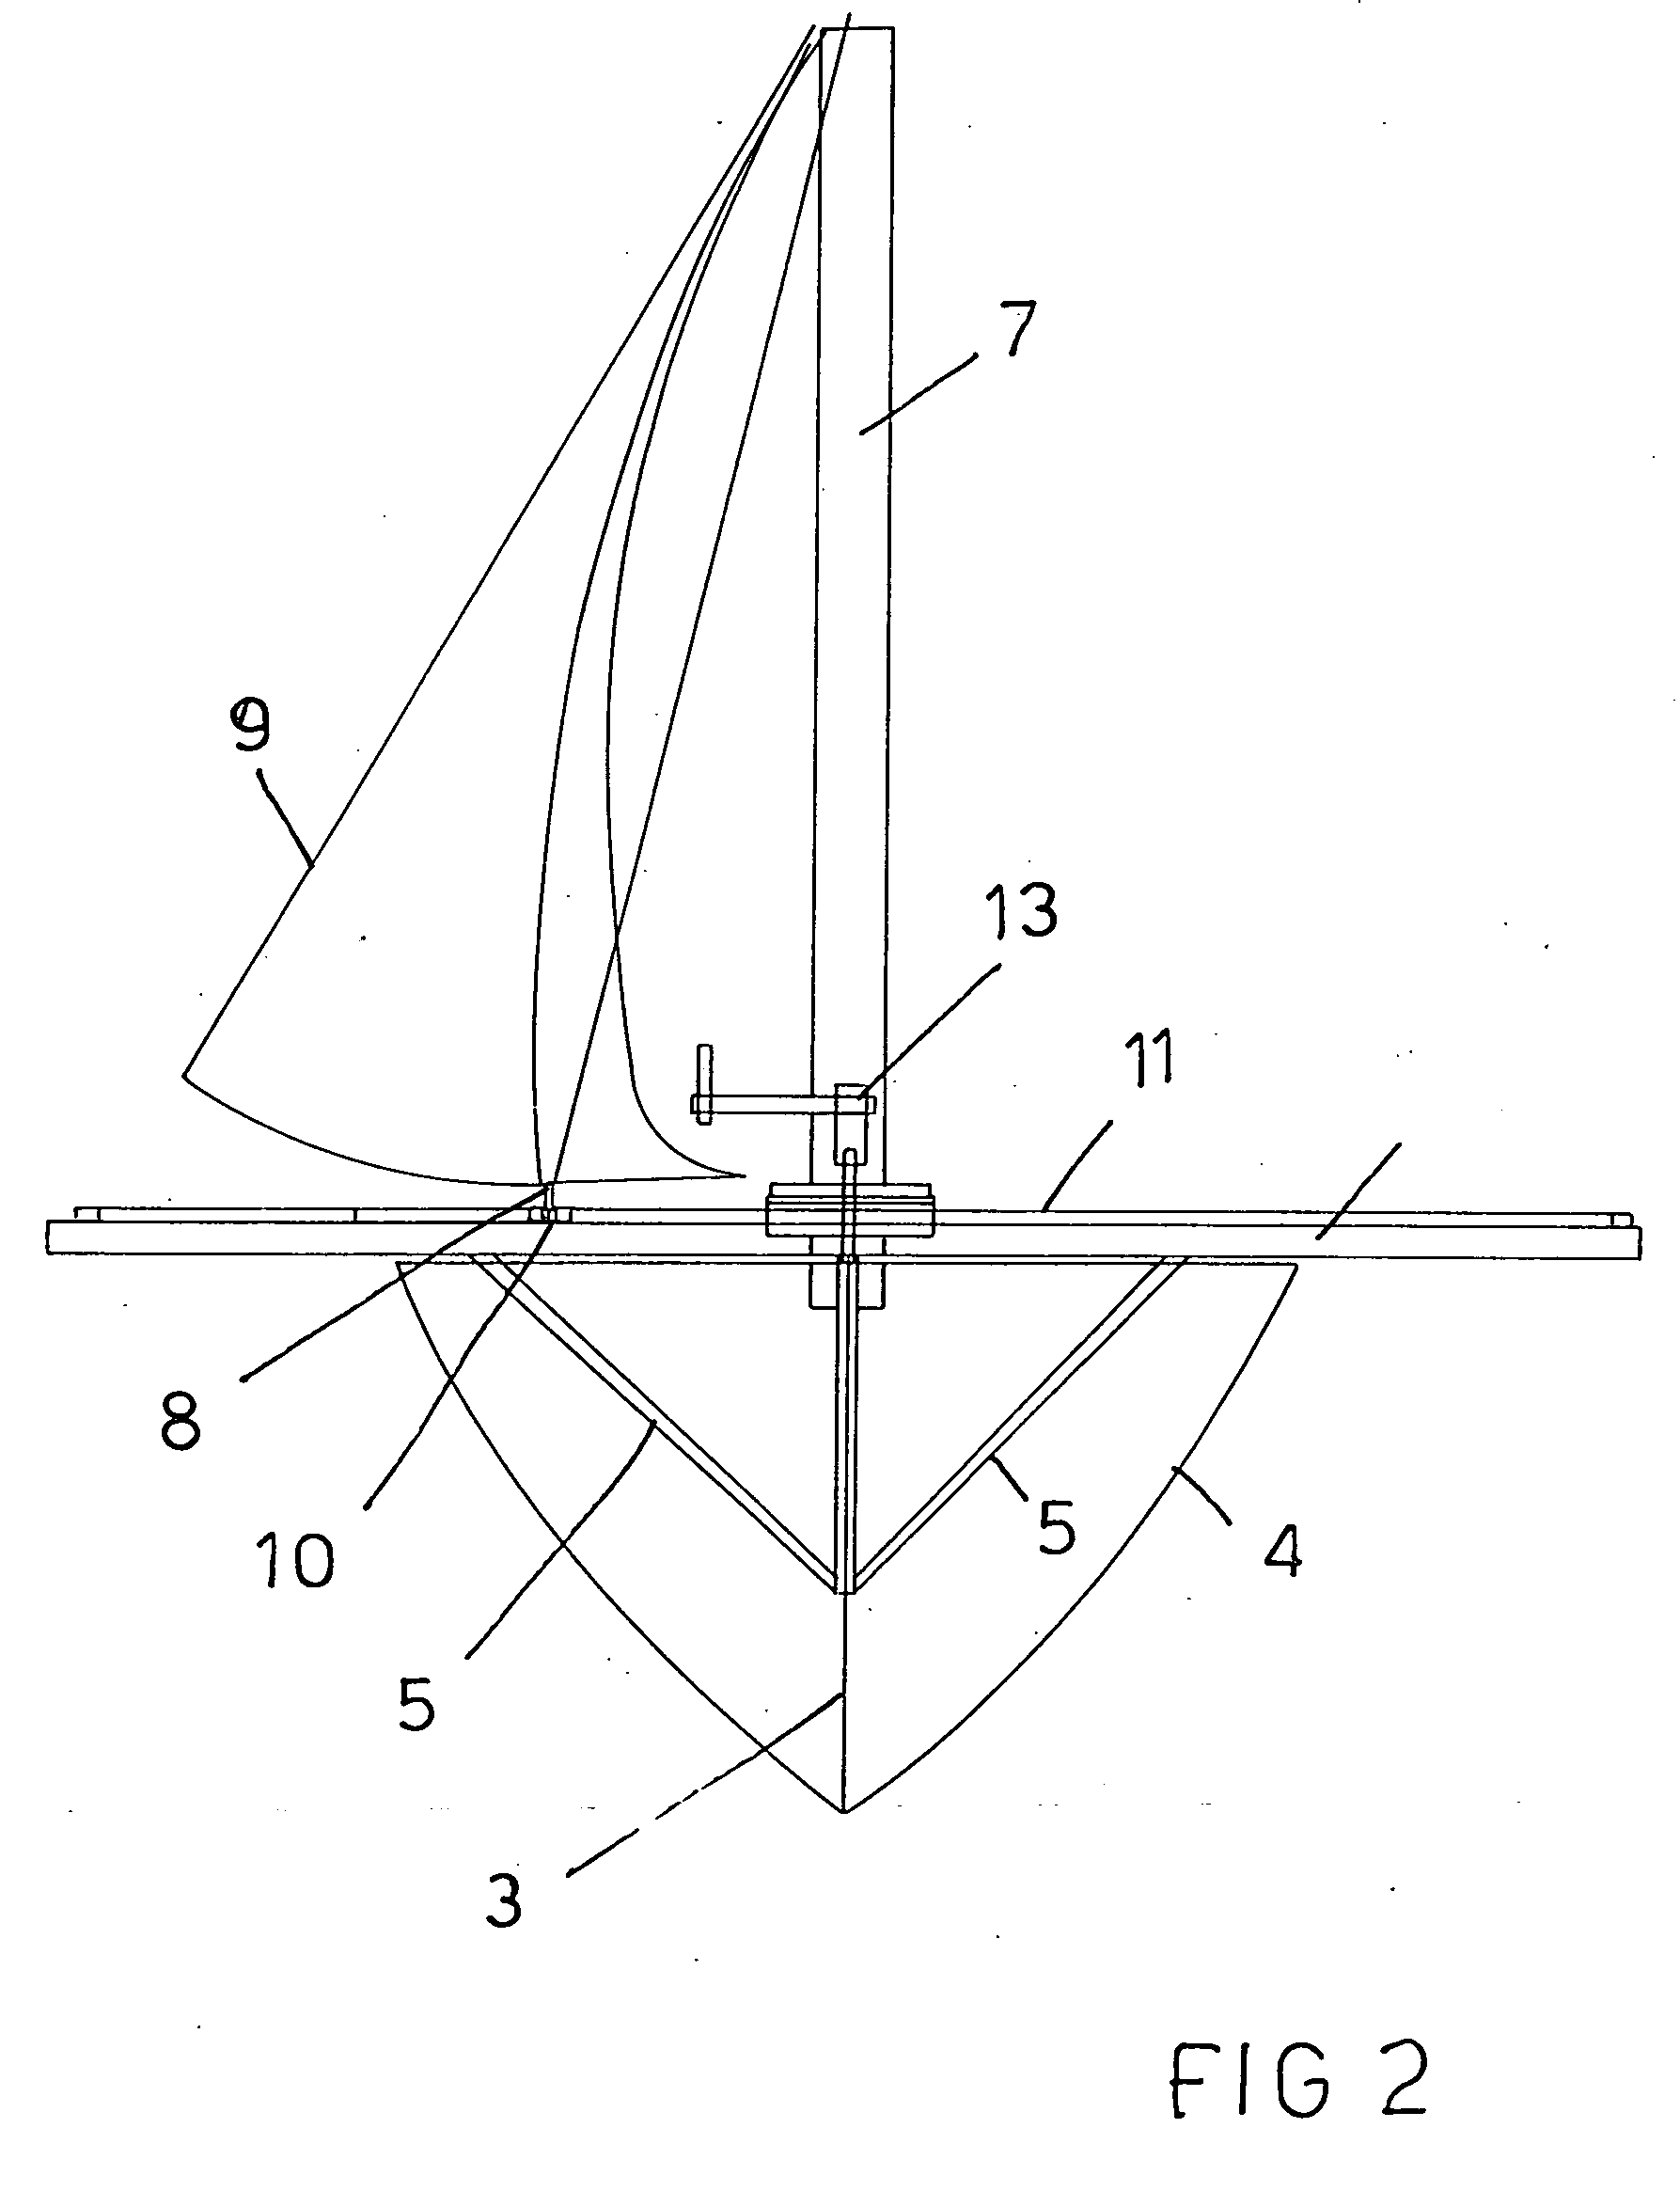 Nautical device for adjusting the bow sail of a sail boat